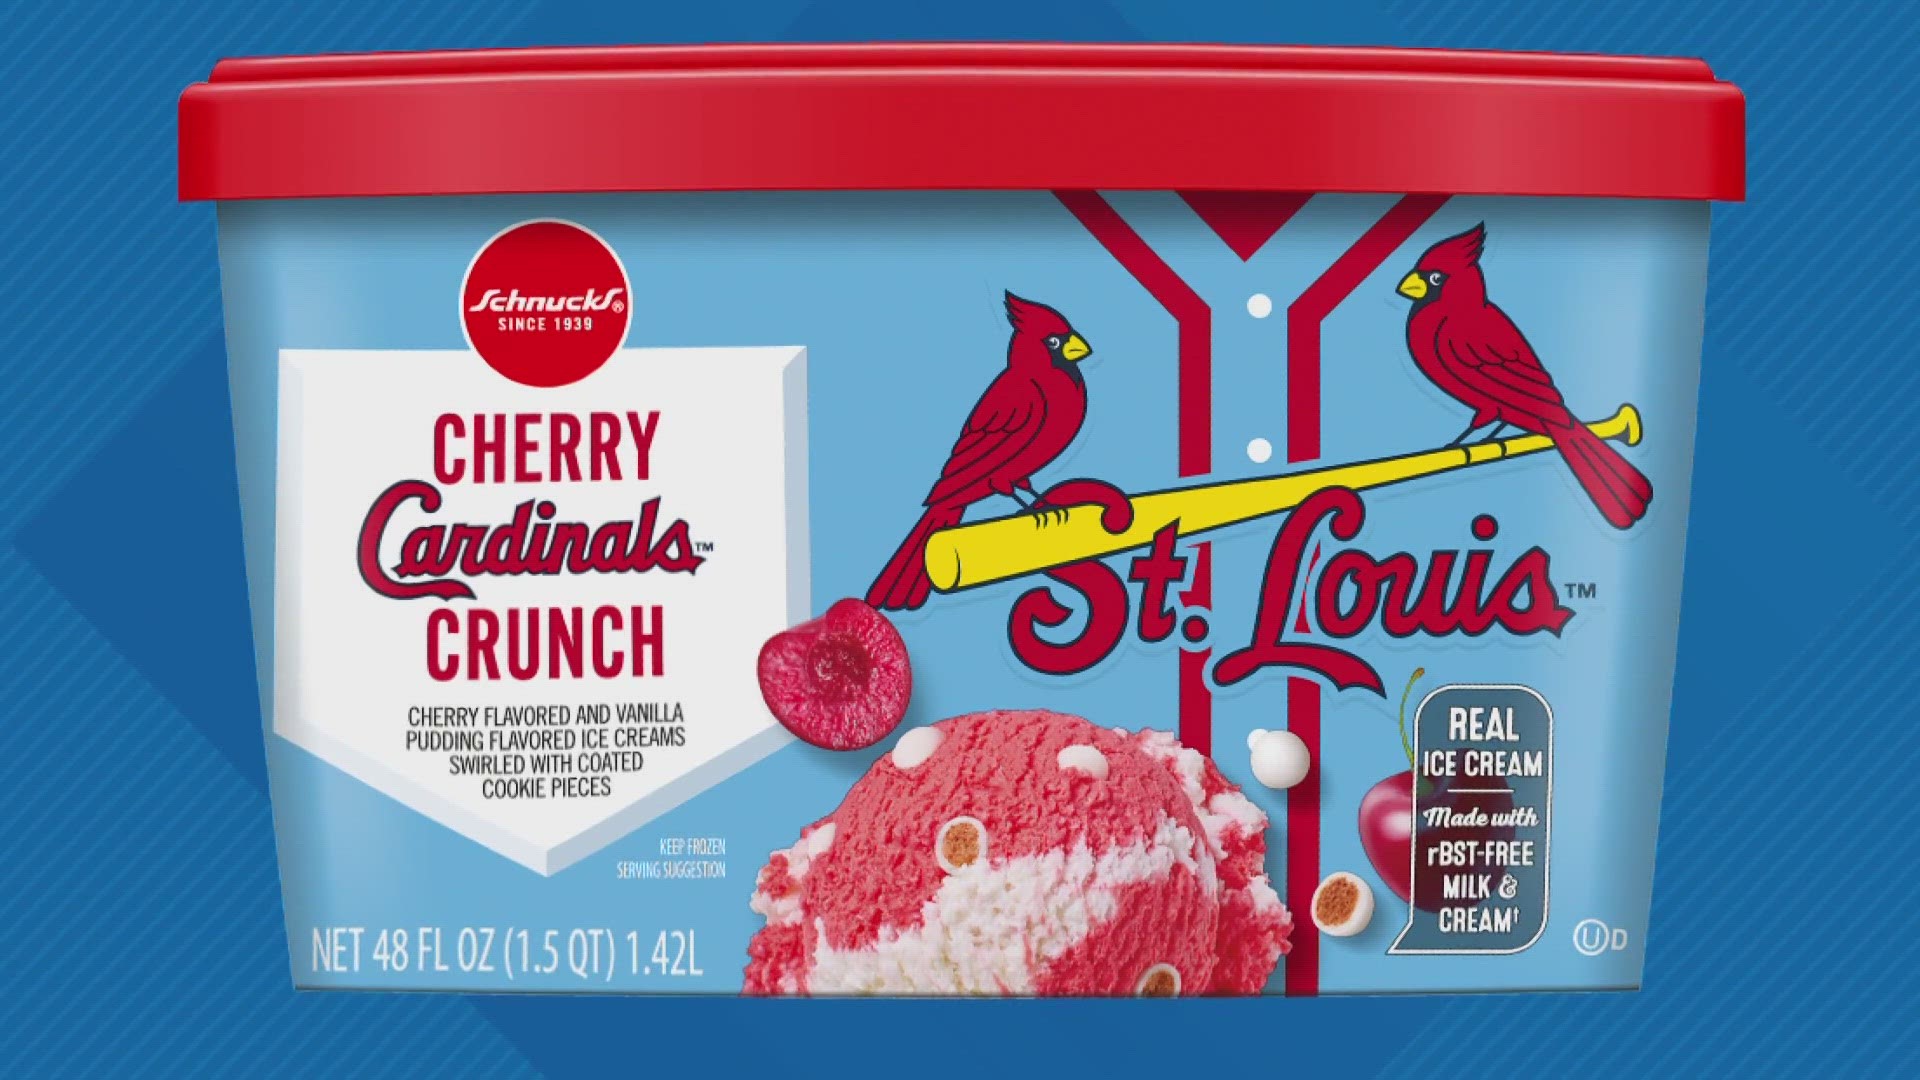 Cherry Cardinals Crunch is now available at most Schnucks stores across the midwest. The ice cream is cherry and vanilla-flavored, with cookie swirls.